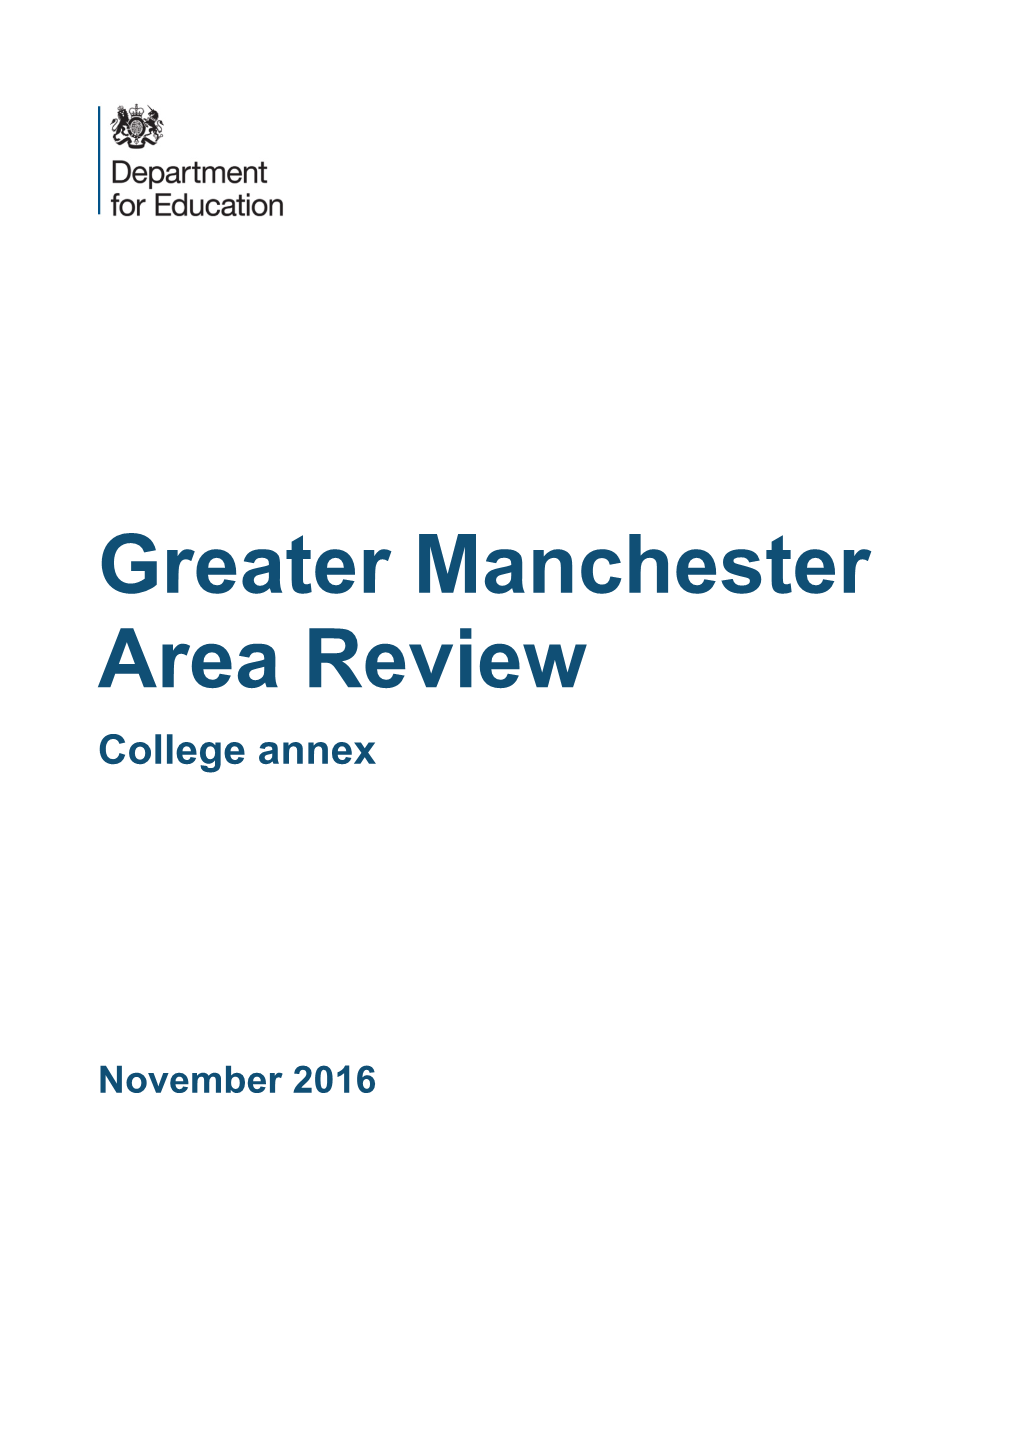 Greater Manchester Area Review: College Annex